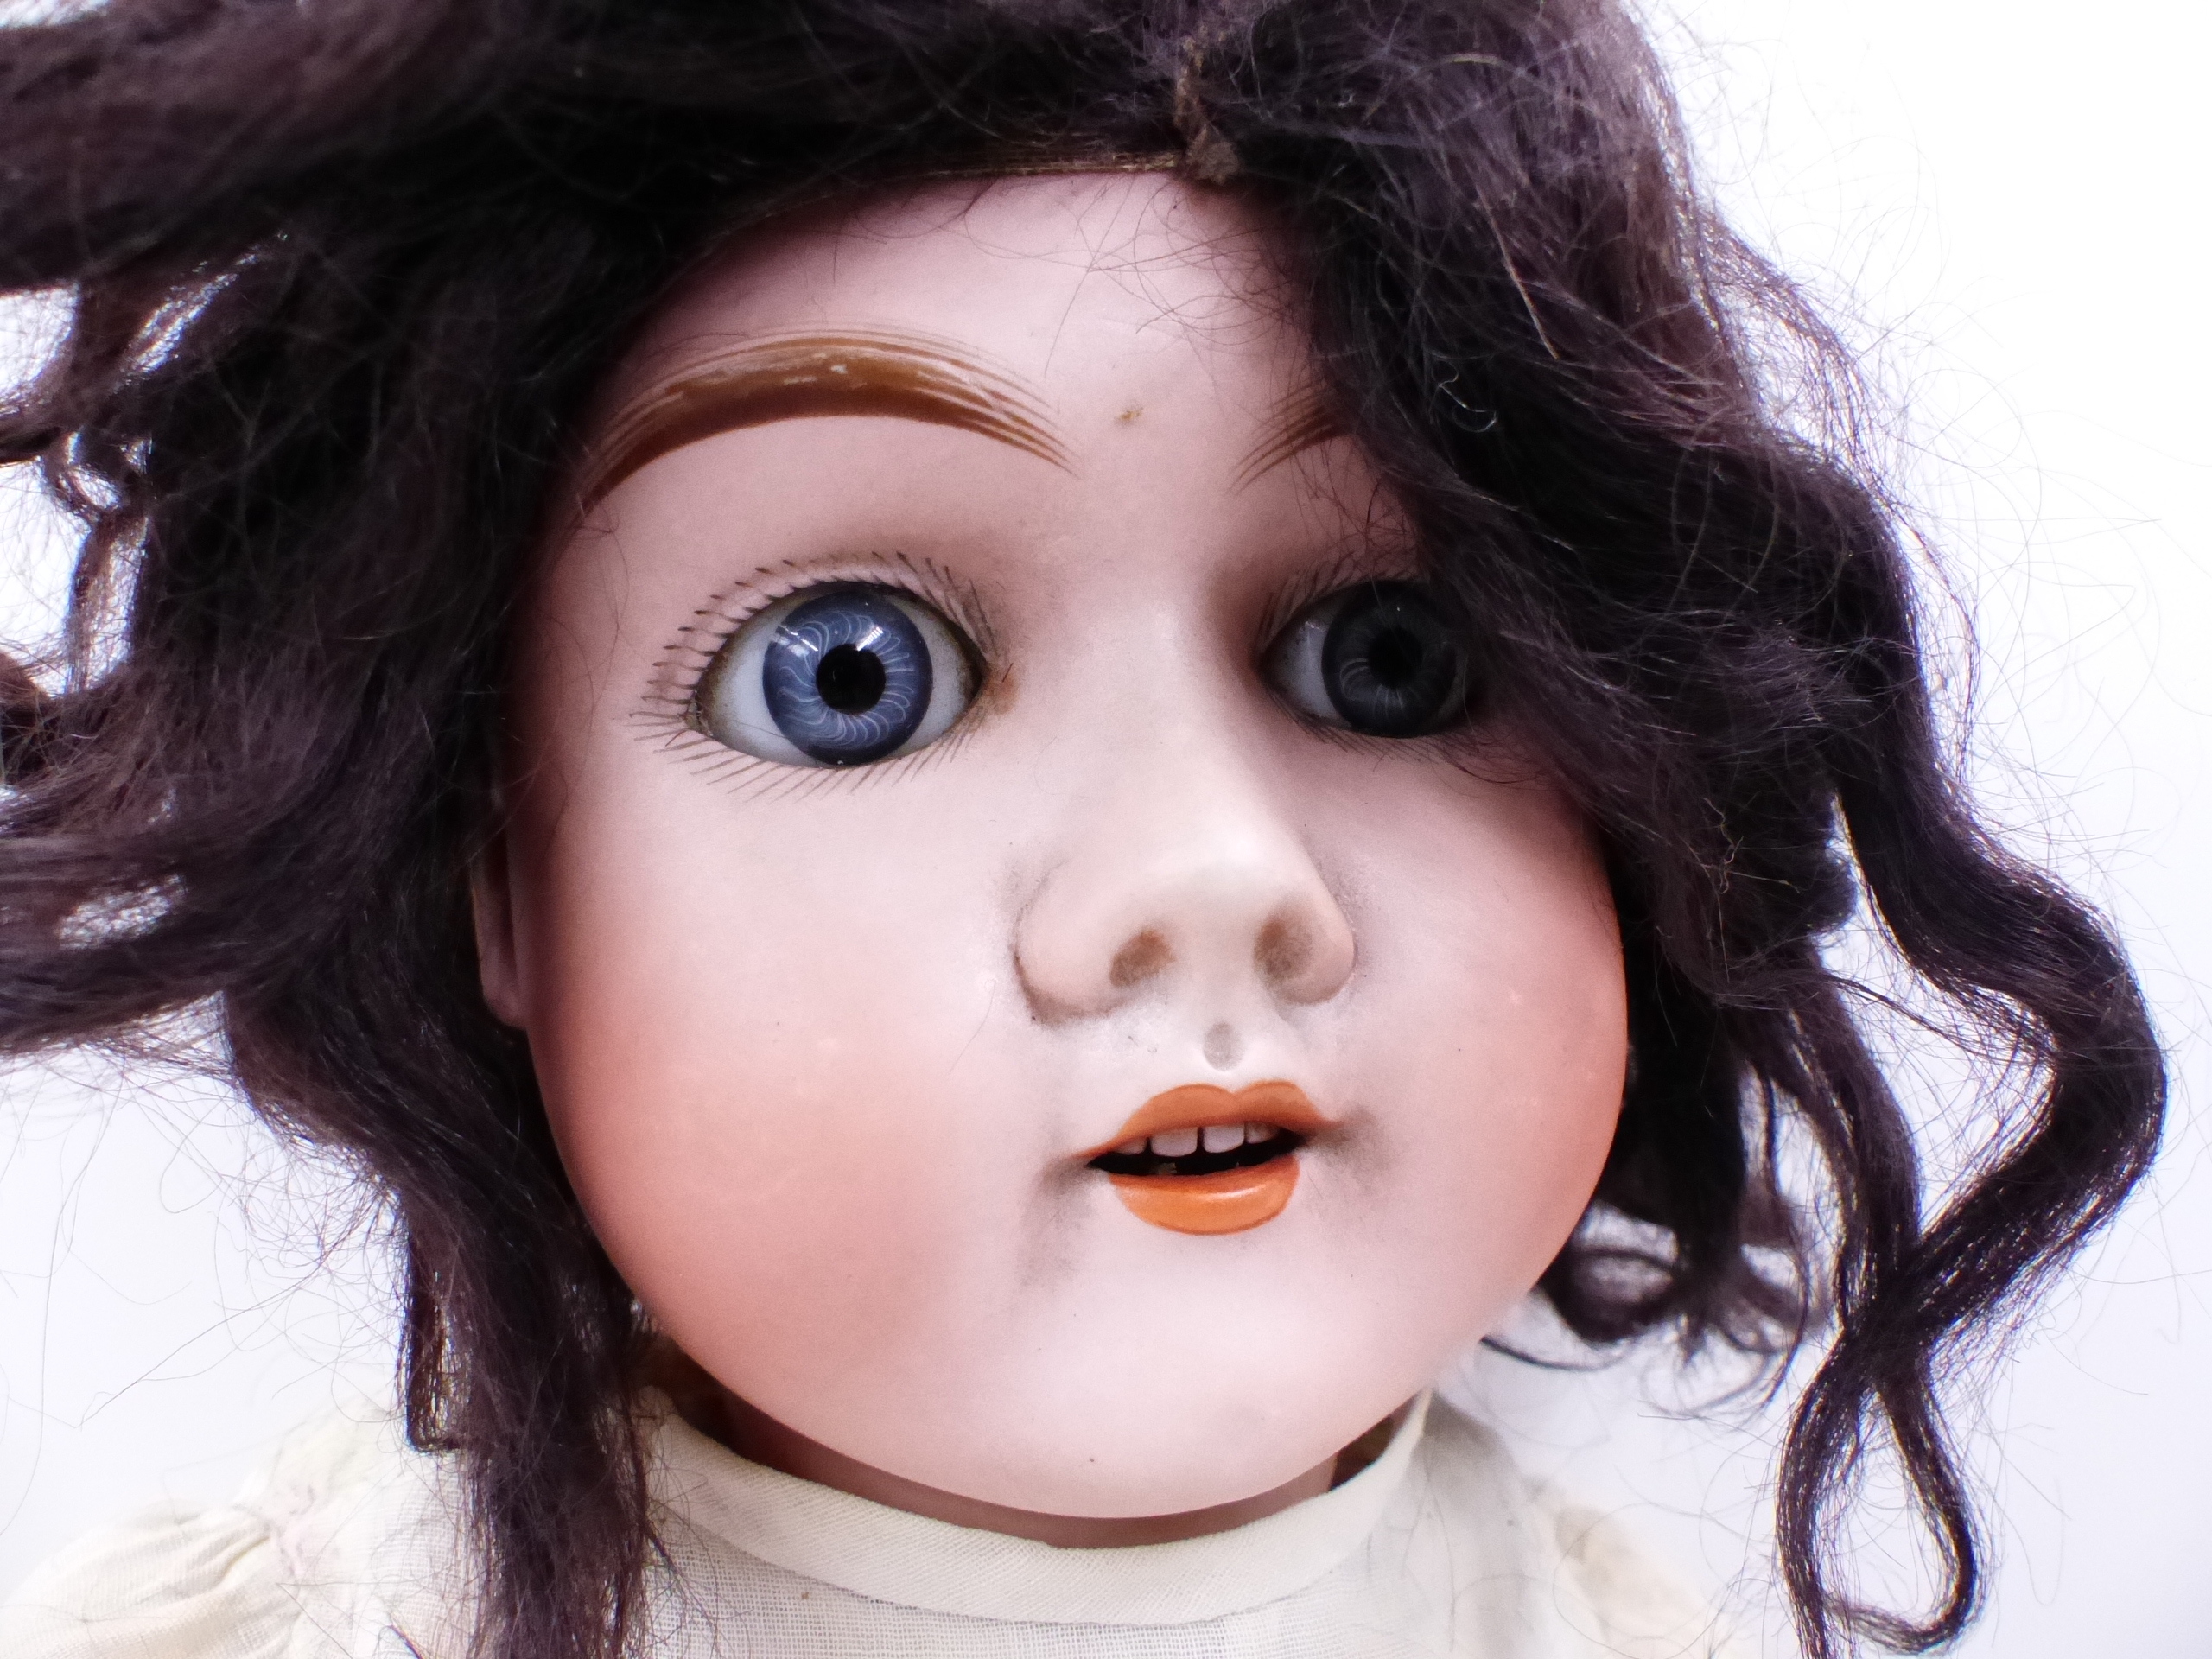 AN ANTIQUE MAX HANDWERKE BISQUE HEAD DOLL NO 283/29 WITH SLEEPING EYES AND JOINTED COMPOSITION BODAY - Image 26 of 96